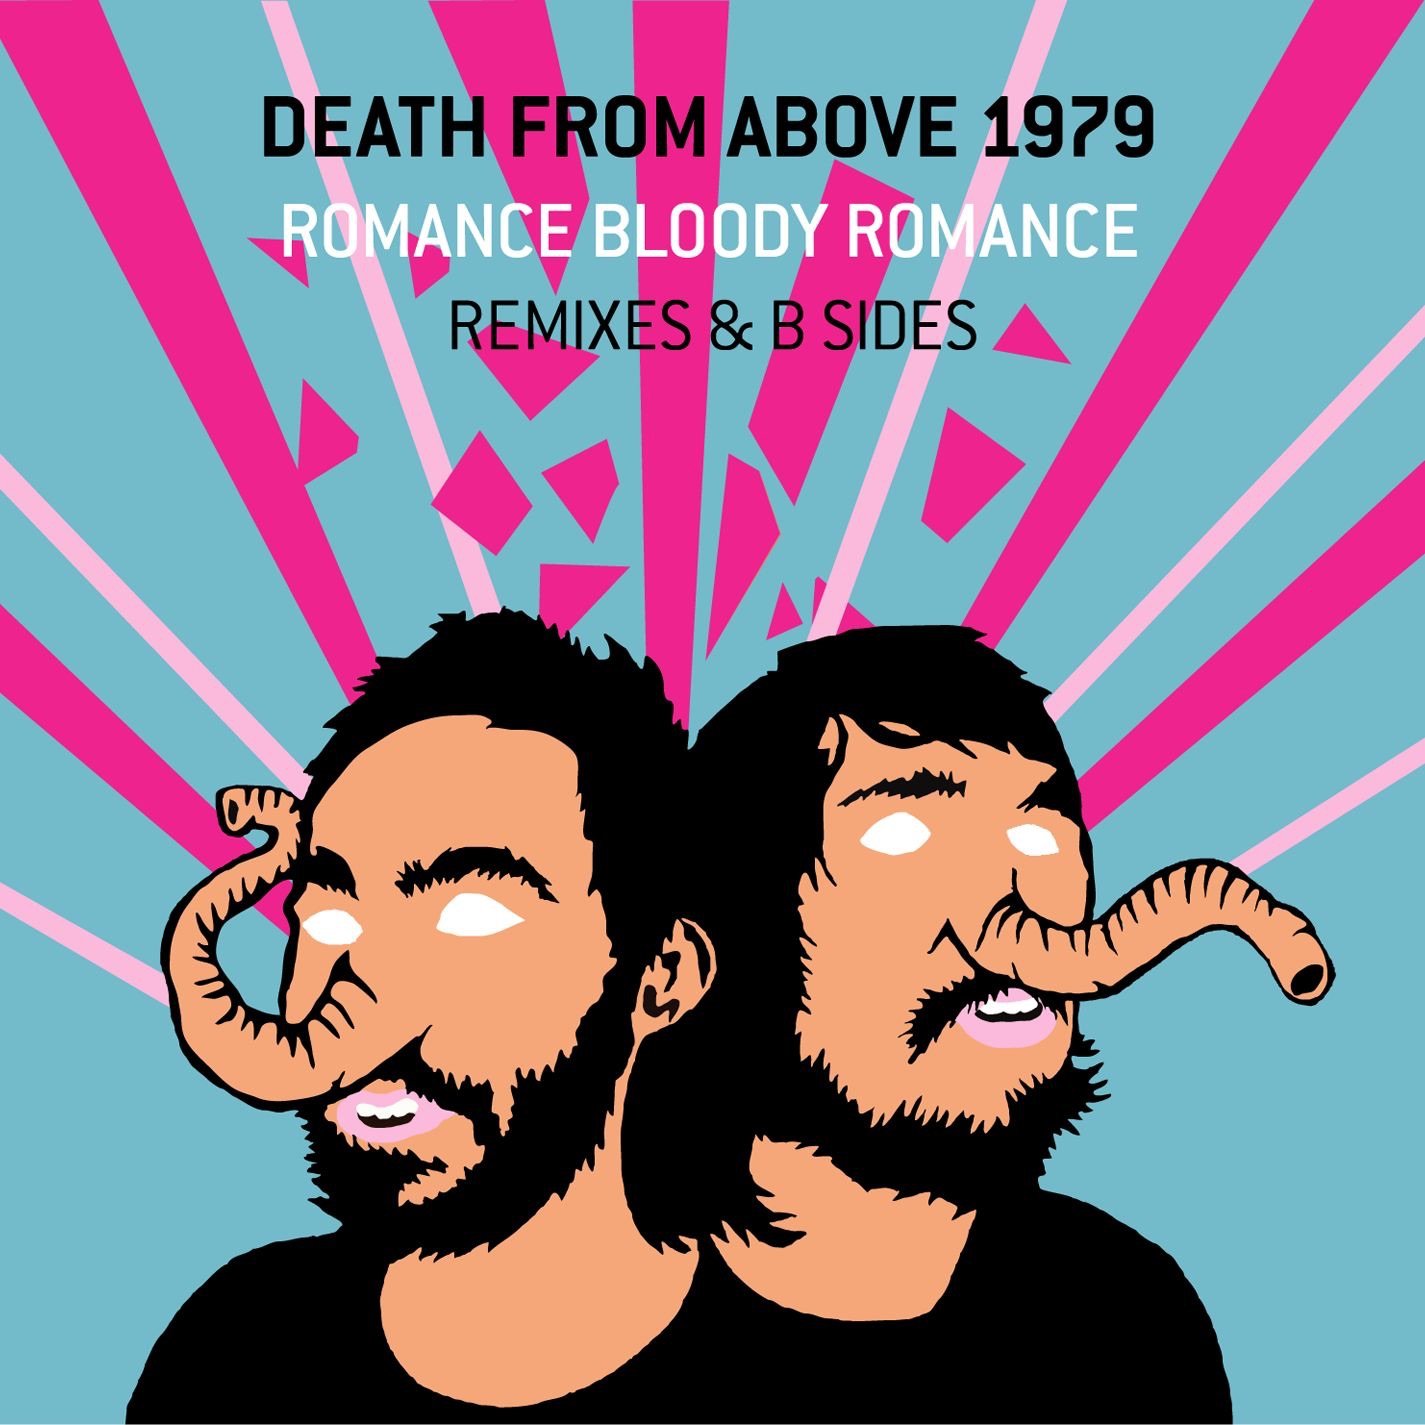 New got problems. Death from above 1979. Death from above 1979 album. Death from above 1979 2005 Live. Death from above 1979 кавер.